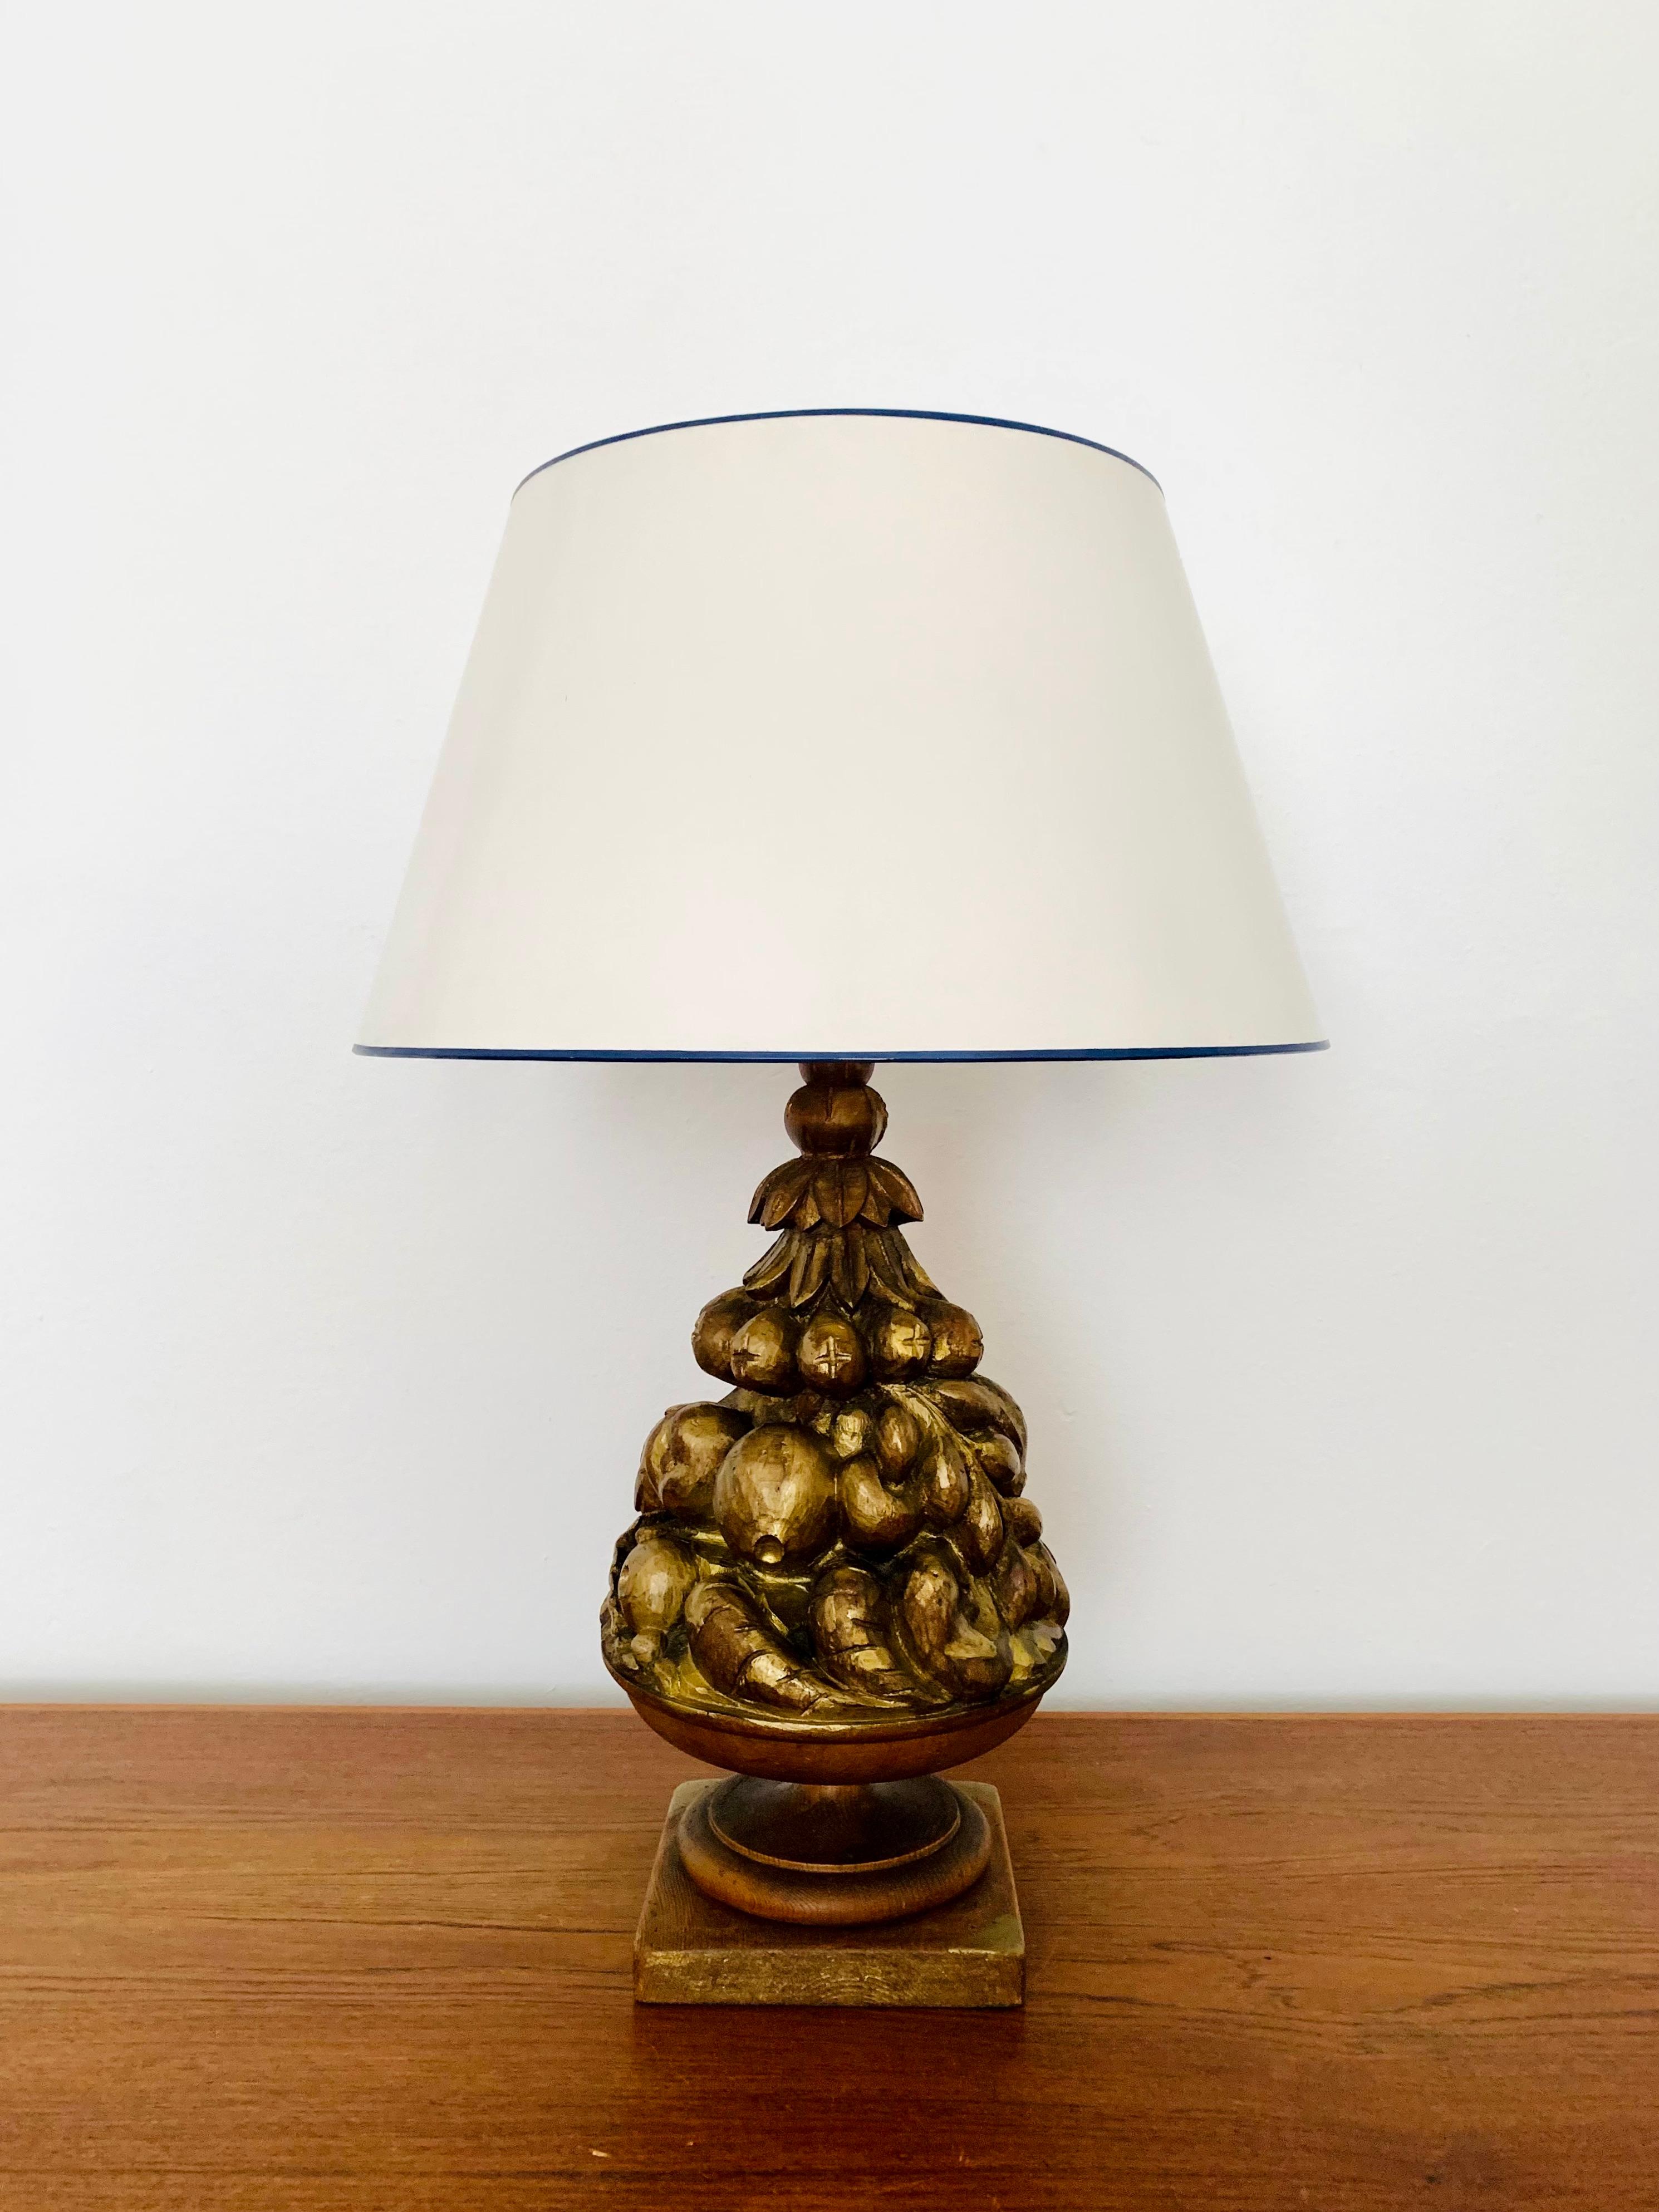 Very nice large table lamp from the 1970s.
Great design and high-quality workmanship.
The wooden base is richly decorated with carvings in fruit decor.
The surface is gilded in places.
A wonderful light emerges.

Condition:

Very good vintage